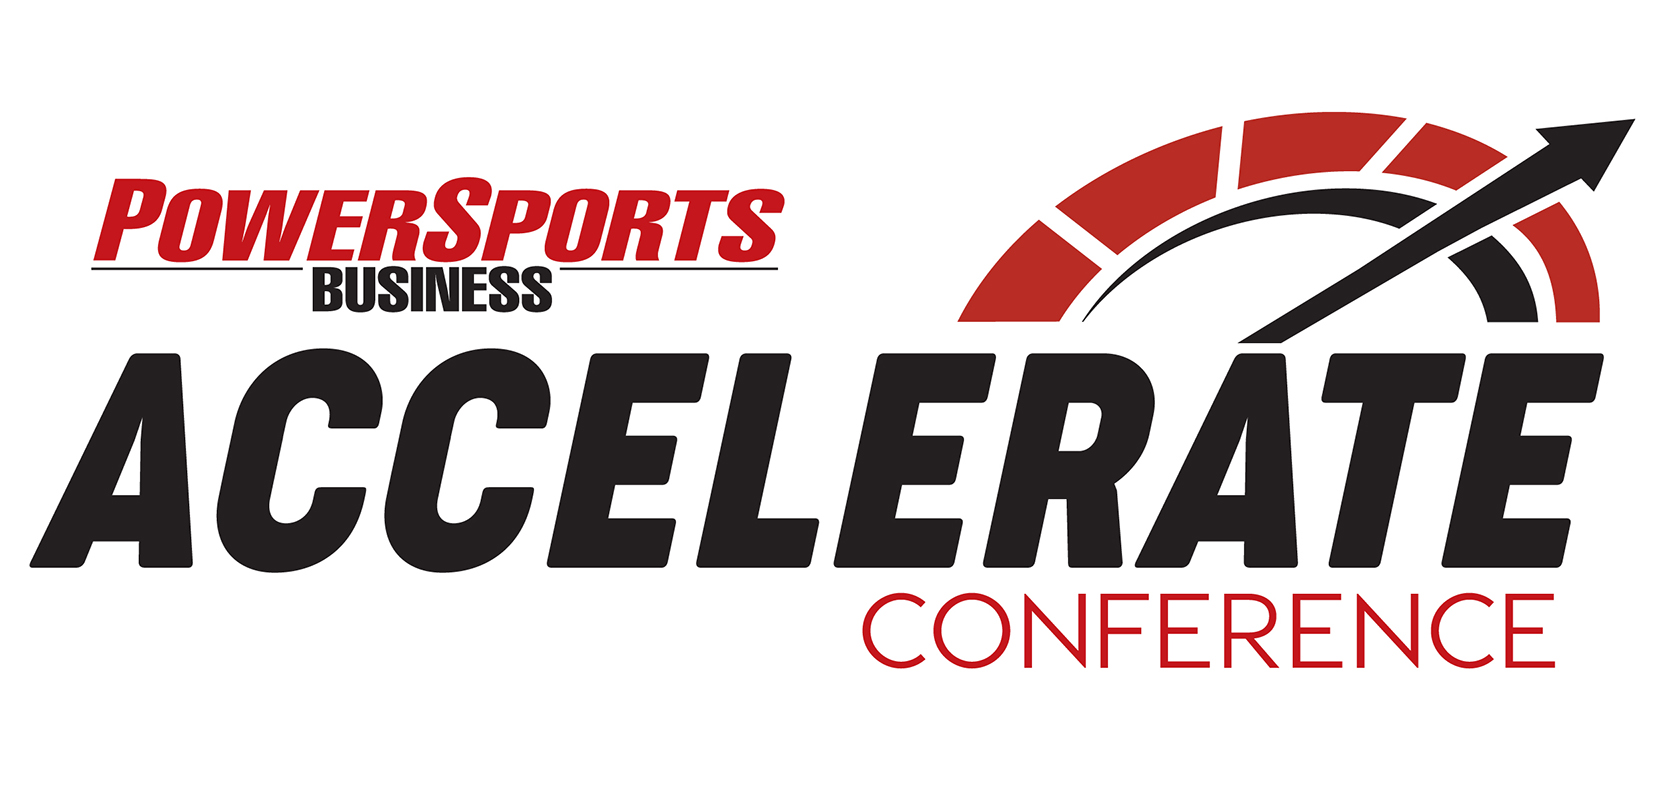 Silver-level sponsor joins Accelerate Conference